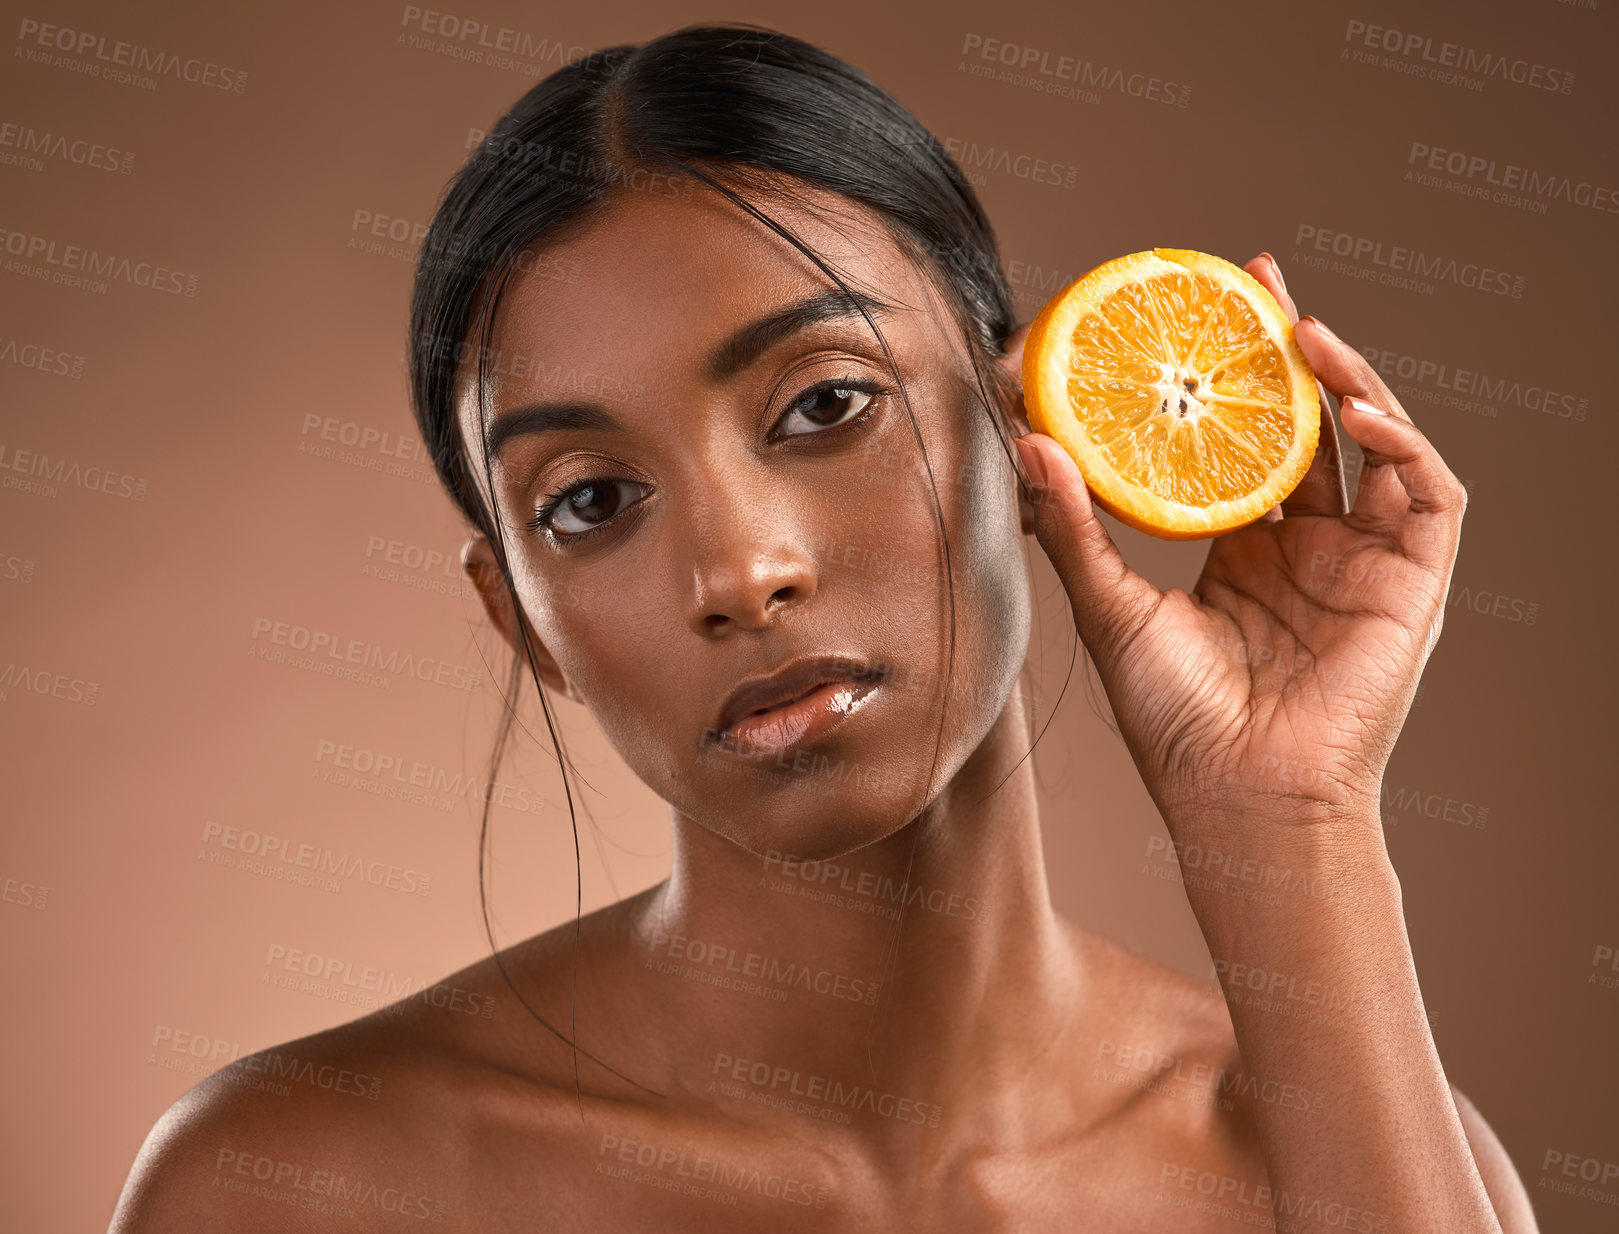 Buy stock photo Portrait of a beautiful young woman posing with an orange against a brown background